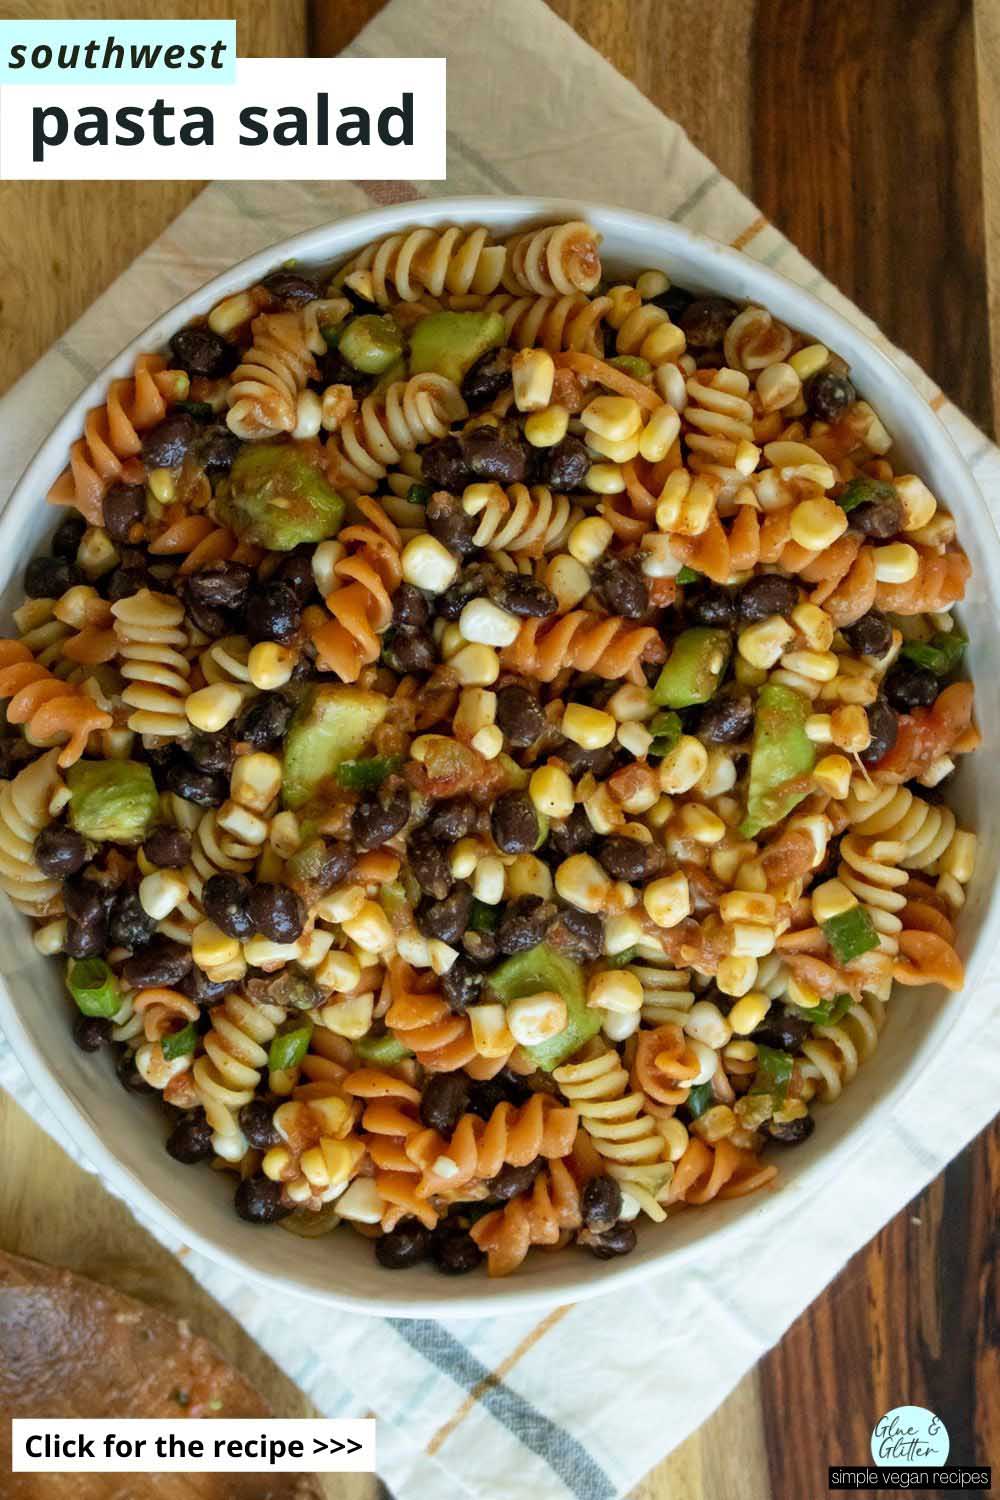 southwest pasta salad in a serving bowl on a wooden table, text overlay